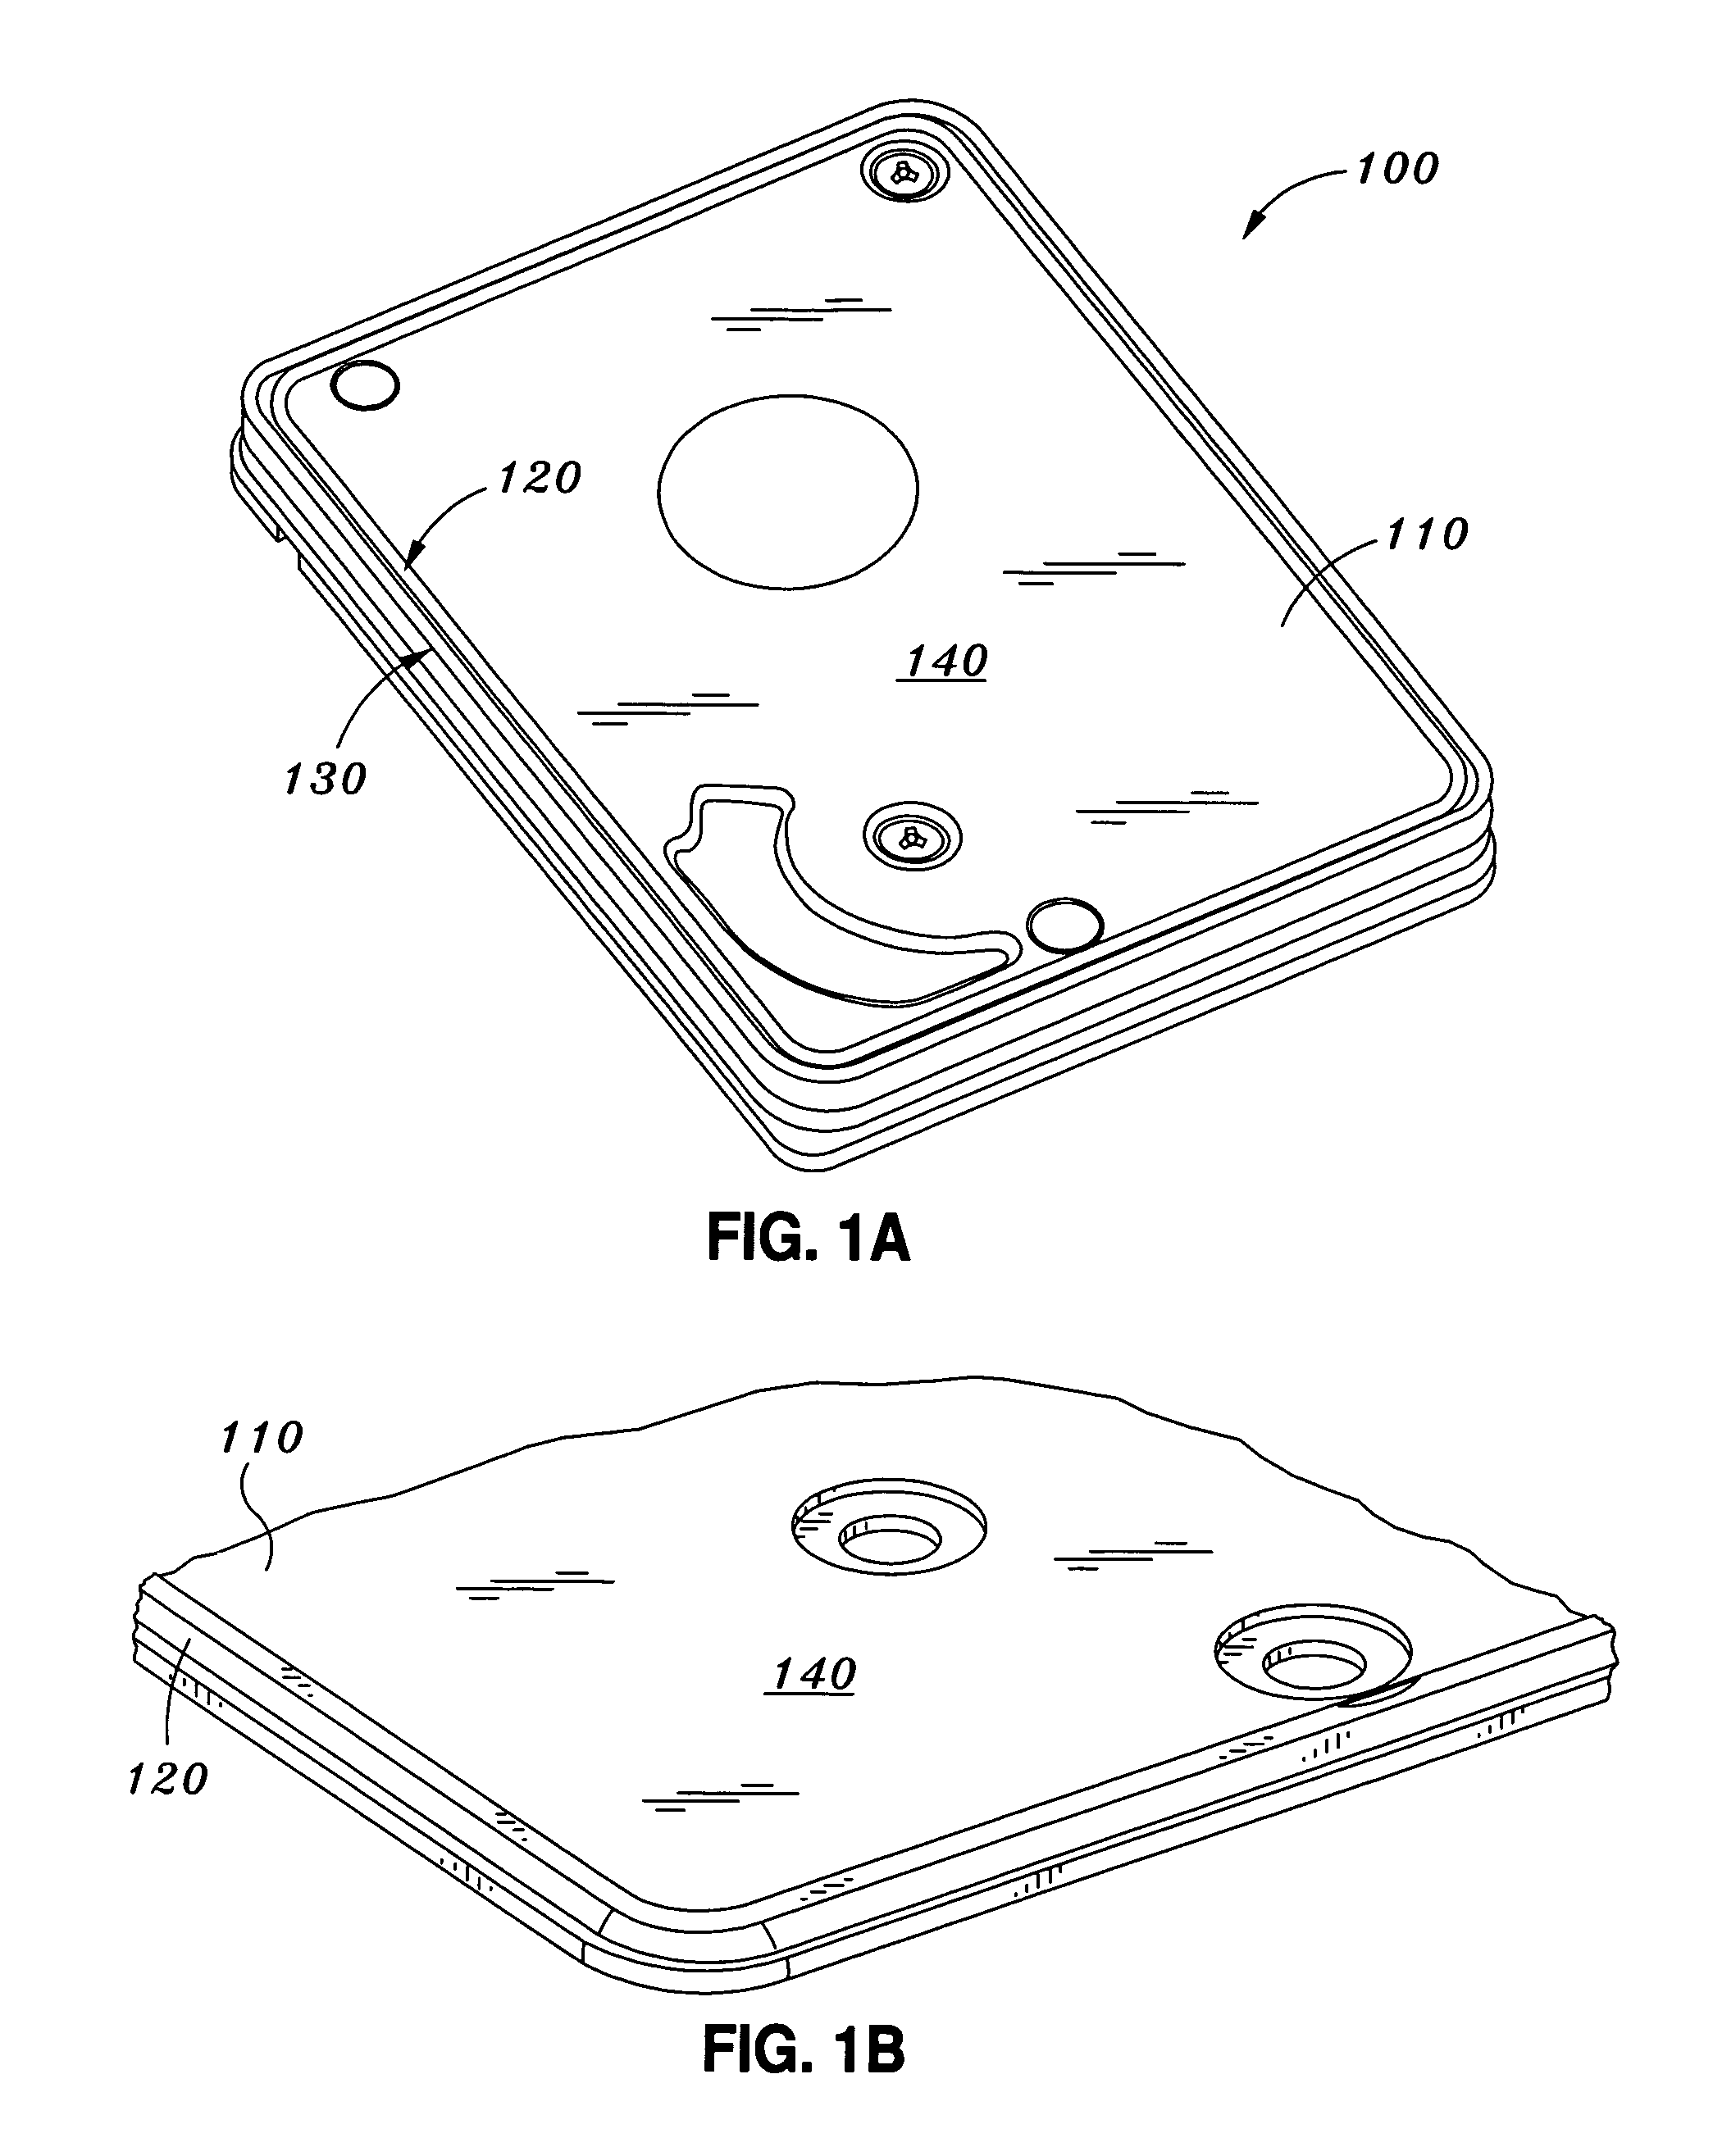 Radial top cover gasket for disk drives